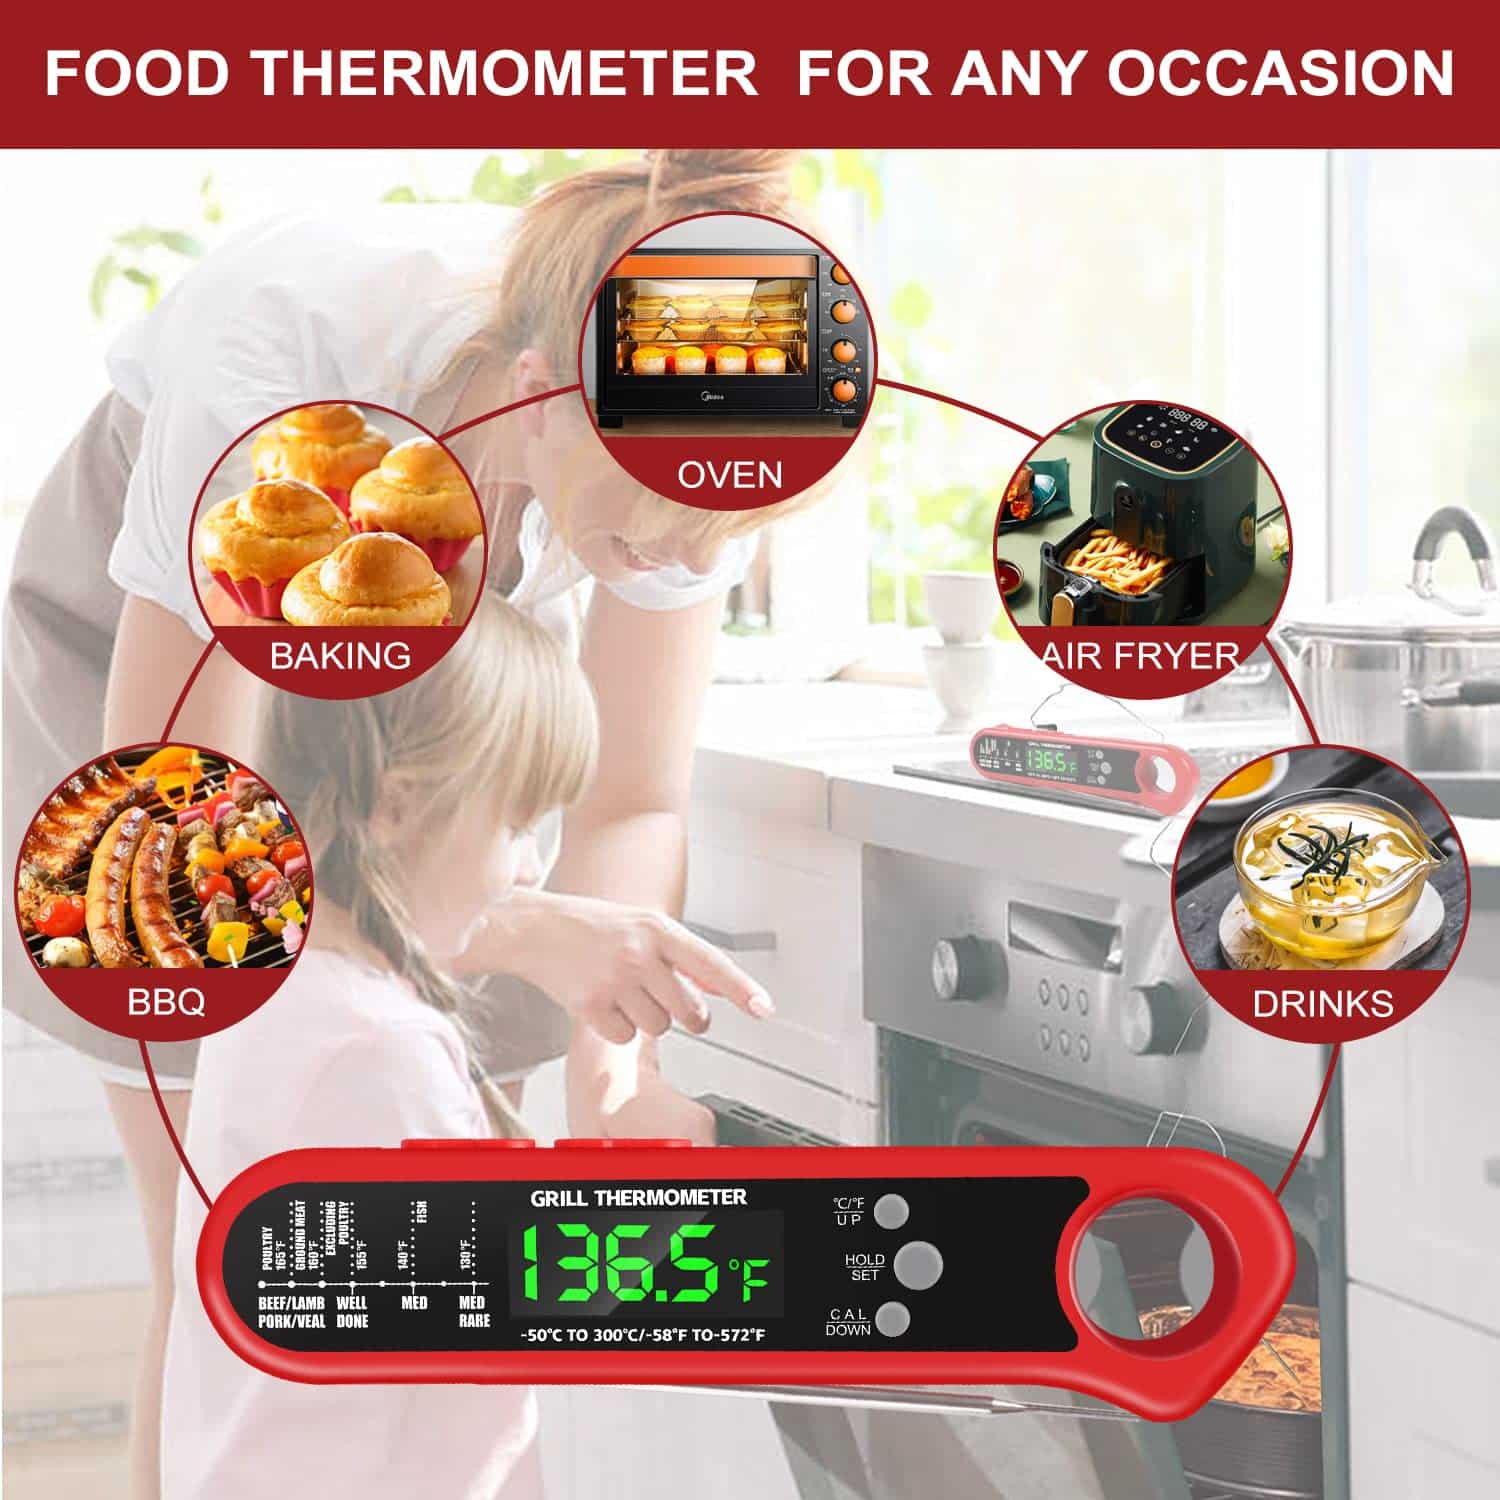 3 in 1 Digital Meat Thermometer, Instant Read Food Thermometer with 2 Detachable Wired Probe, Calibration, Alarm Function, LCD Backlight for Grilling, Cooking, BBQ, Kitchen